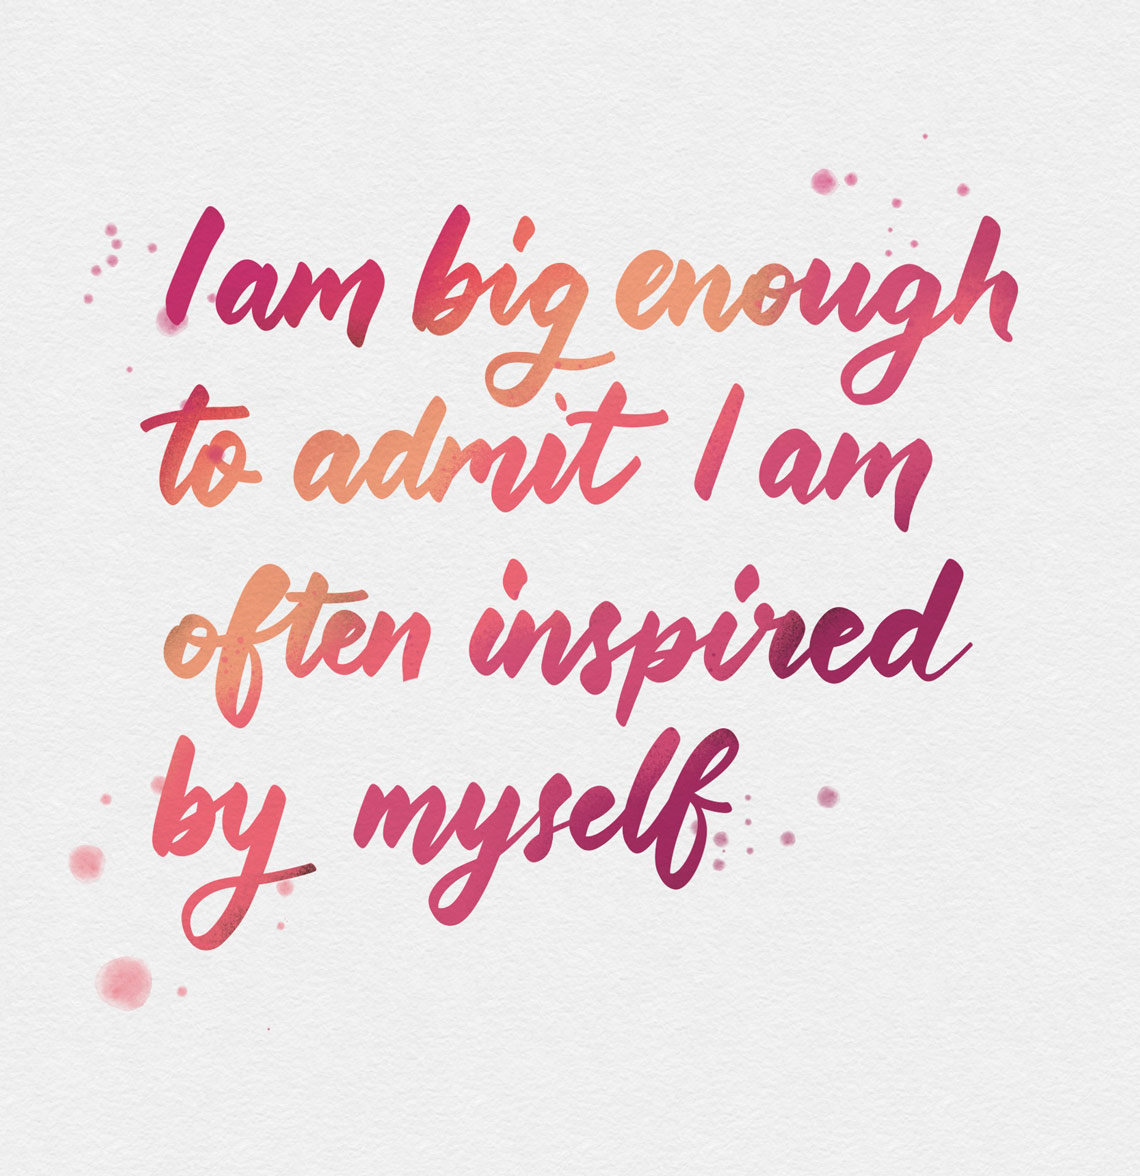 I am big enough to admit I am often inspired by myself - Leslie Knope